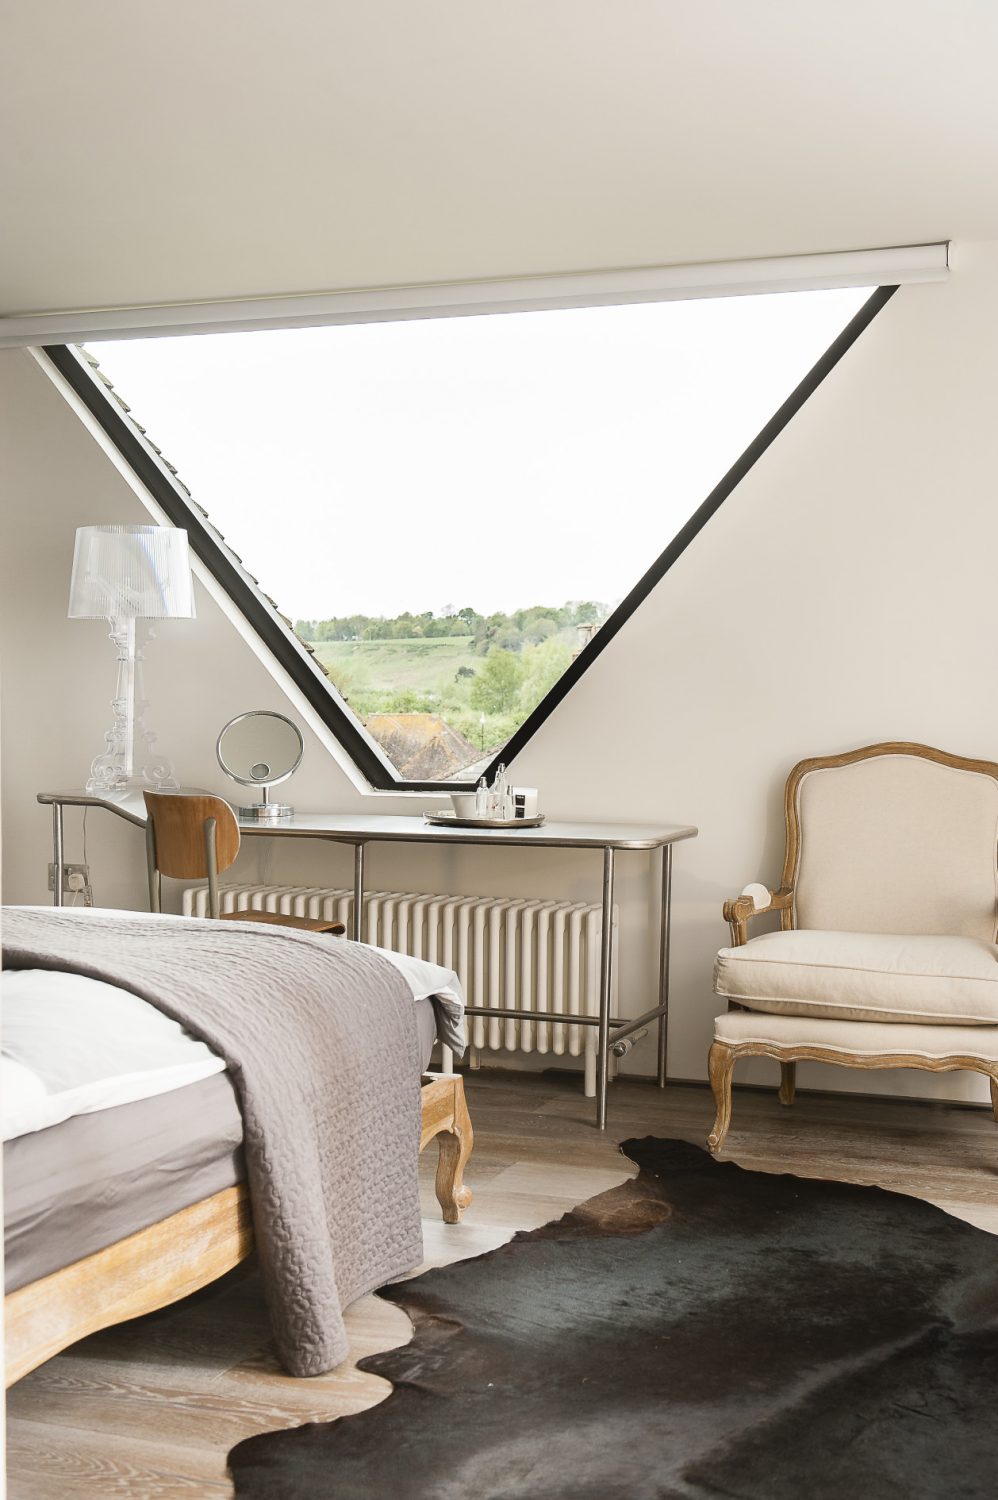 The master bedroom features an amazing triangular window that spans between the twin gables of the roof from which there are wonderful views of the surrounding buildings and the countryside beyond